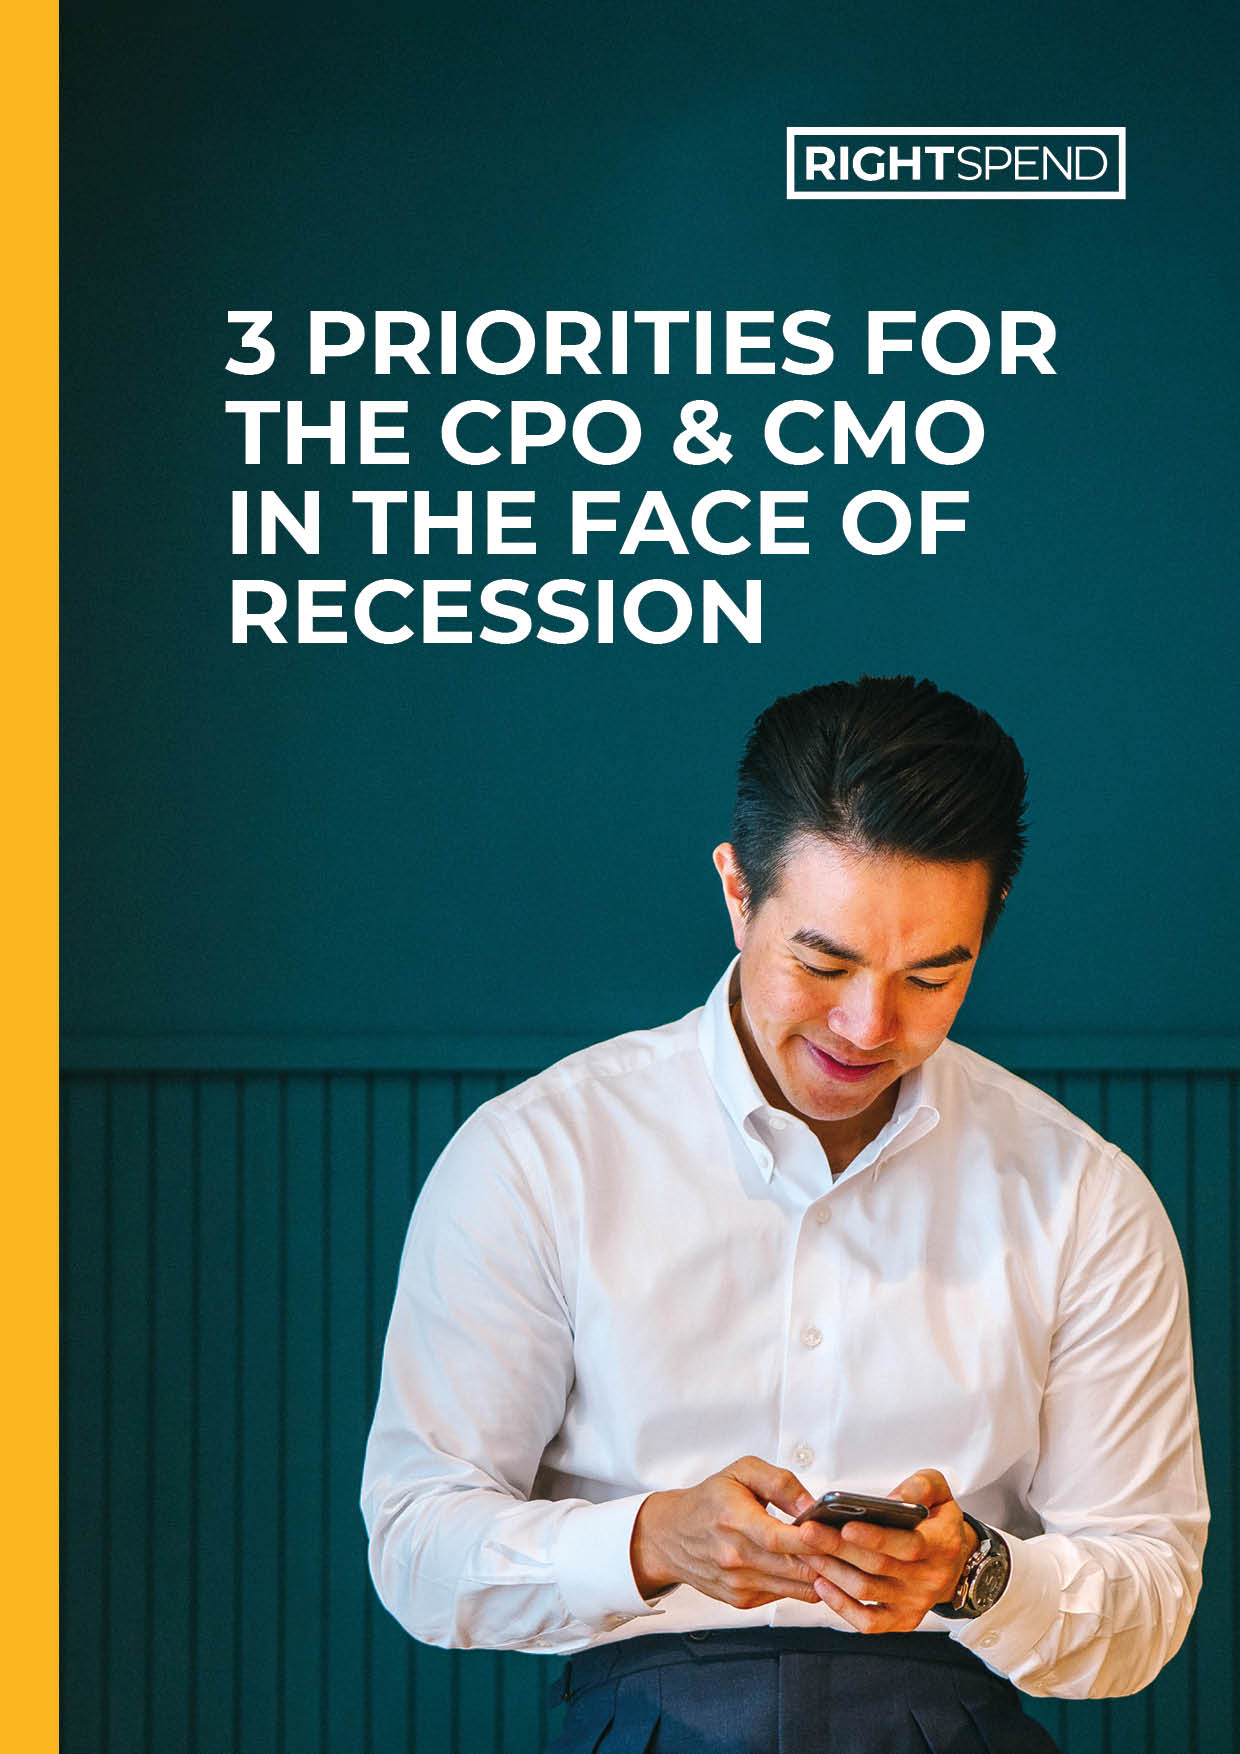 Thumbnail- 3 priorities for the CPO & CMO in the face of recession-1